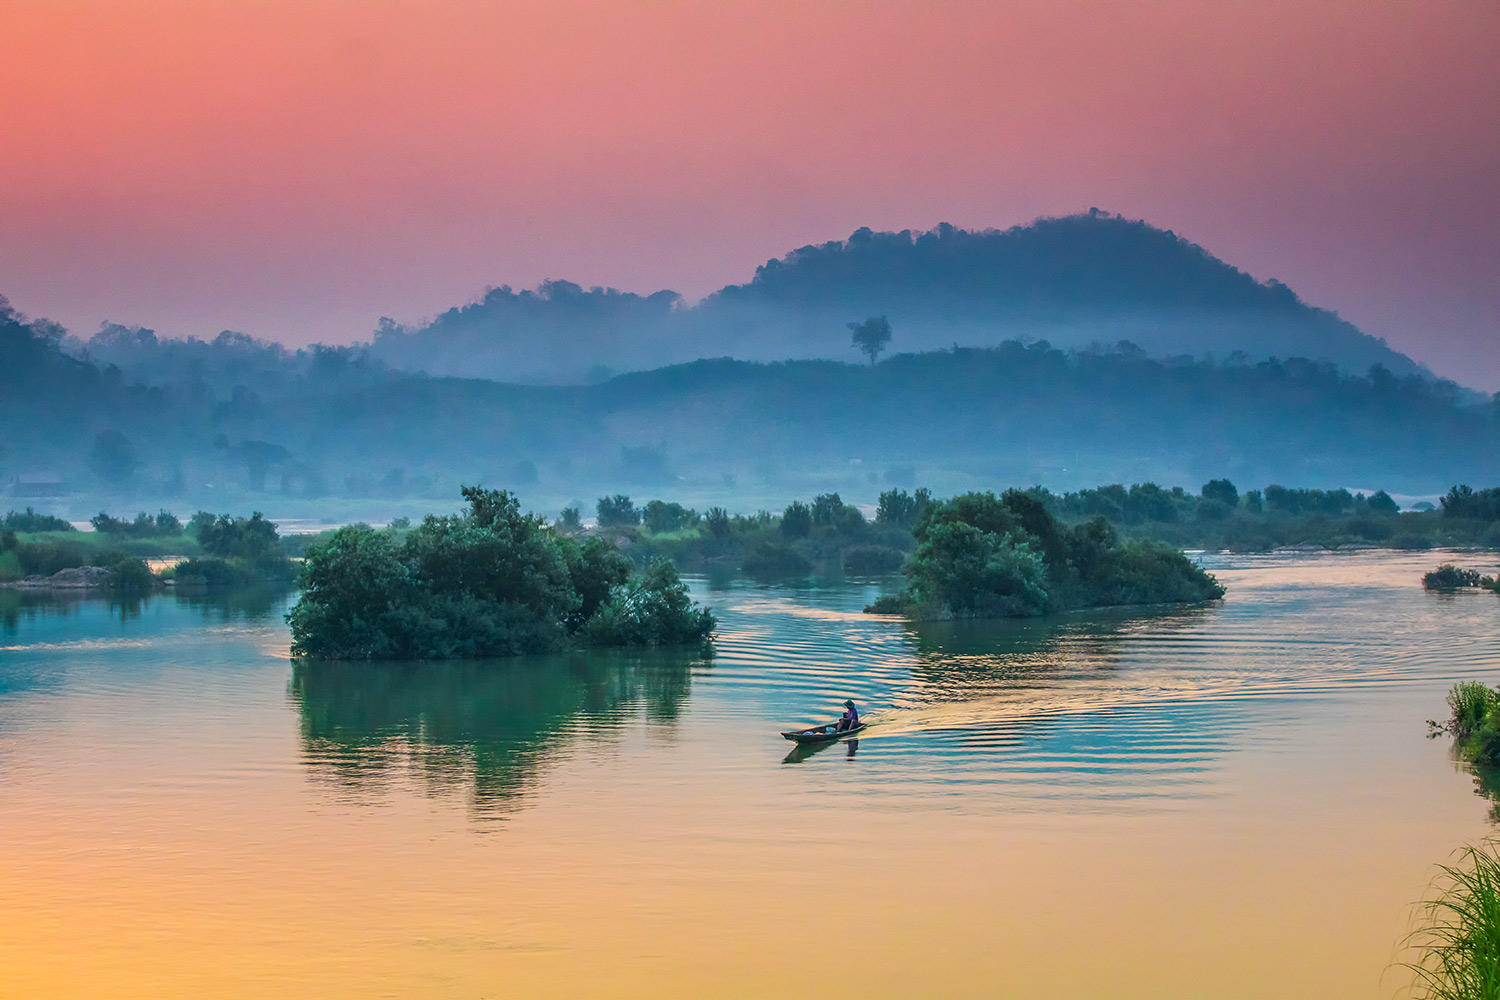 Sunrise on the Mekong river in the NongKhai province, on the border of Thailand and Laos.